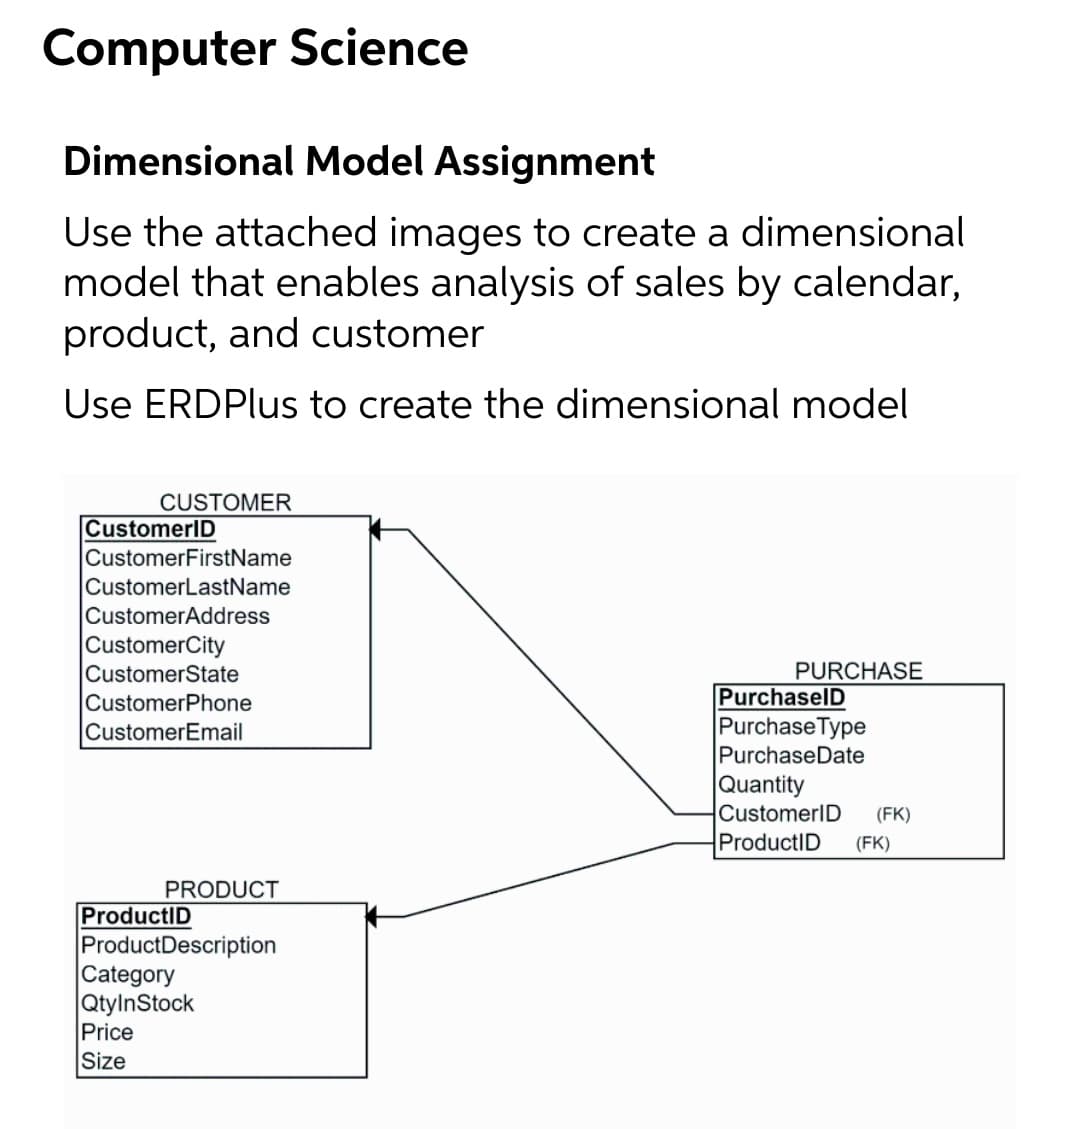 Computer Science
Dimensional Model Assignment
Use the attached images to create a dimensional
model that enables analysis of sales by calendar,
product, and customer
Use ERDPlus to create the dimensional model
CUSTOMER
CustomerID
CustomerFirstName
CustomerLastName
CustomerAddress
CustomerCity
CustomerState
CustomerPhone
CustomerEmail
PURCHASE
PurchaselD
PurchaseType
PurchaseDate
Quantity
CustomerID
ProductID
(FK)
(FK)
PRODUCT
ProductID
ProductDescription
Category
QtylnStock
Price
Size
